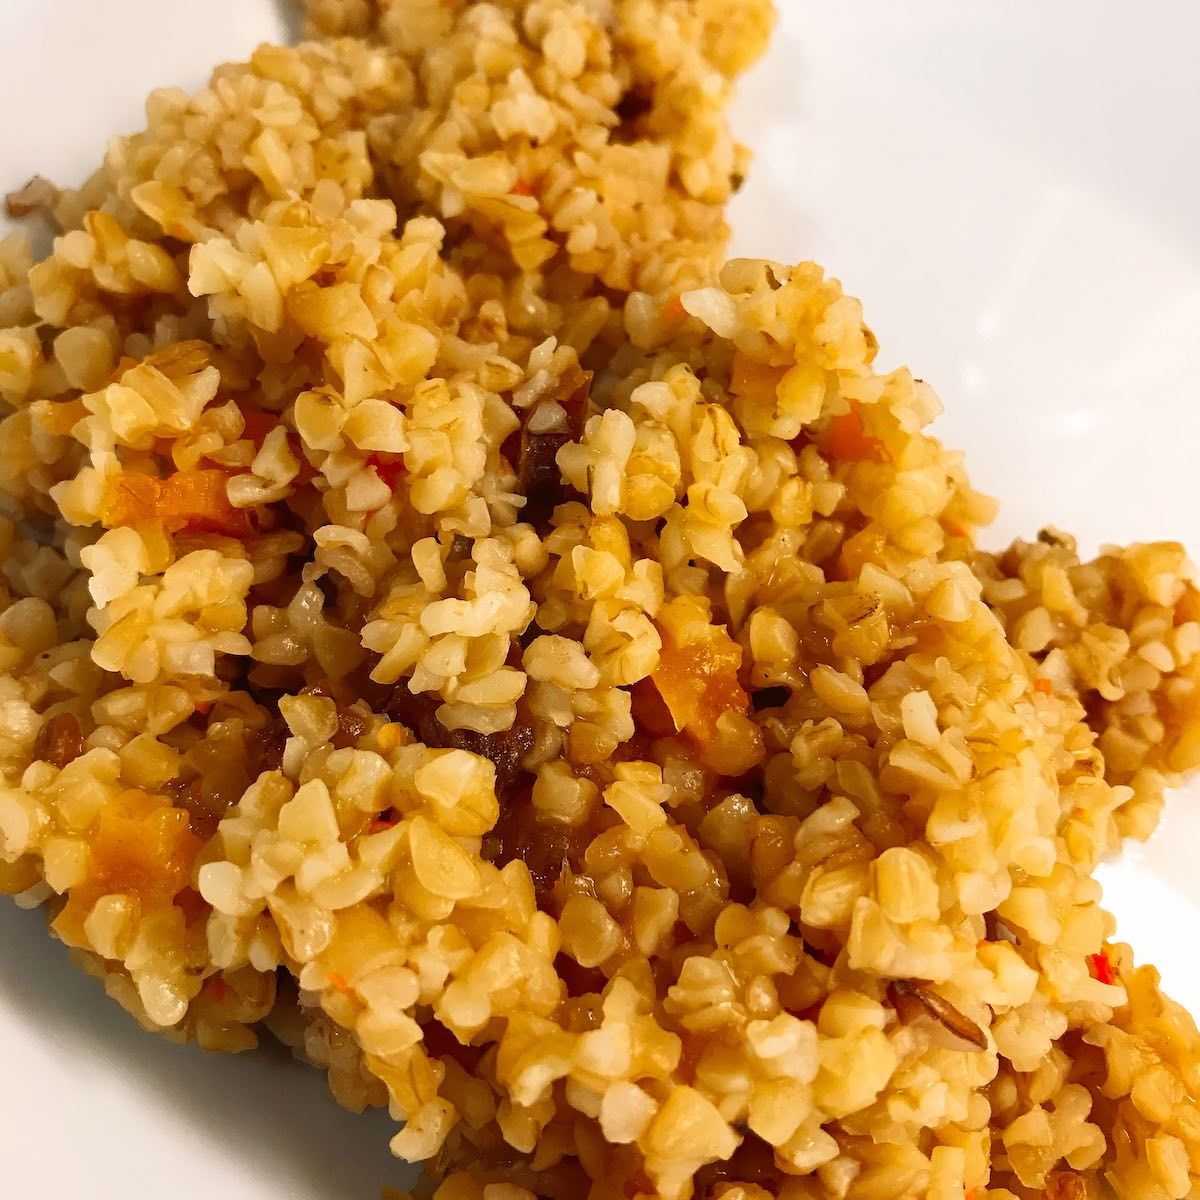 Cooked bulgar wheat with dates and dried apricots